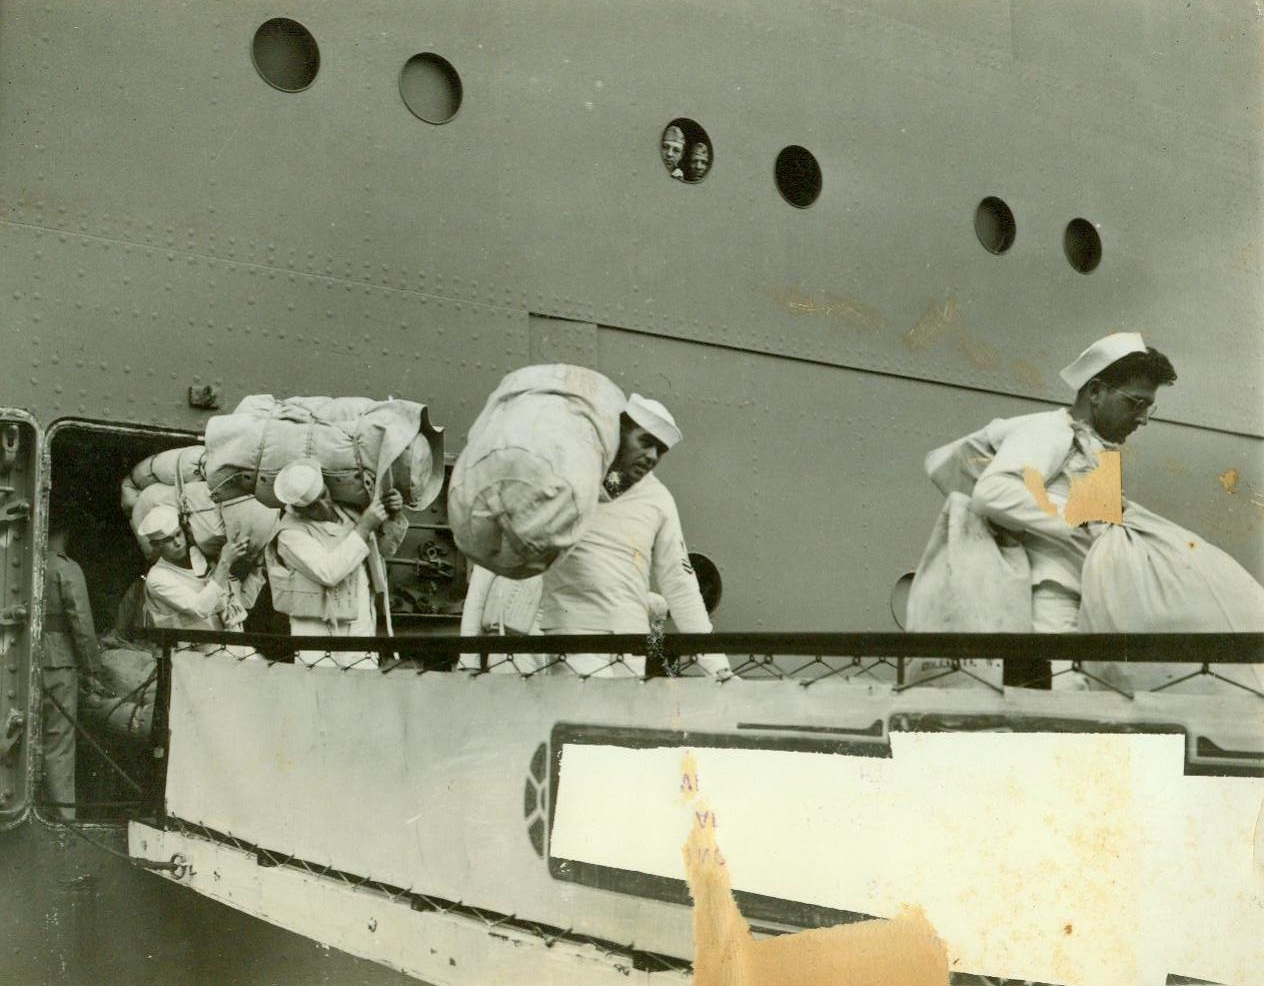 Bound for shore at an American Pacific outpost, 1/3/1942. SOMEWHERE-IN-THE-PACIFIC – Carrying their sea-bags, U.S. sailors go down the gangplank at an American possession in the Pacific, where they are arrived to support forces under attack by the Japanese. Behind them a soldier waits to descend. Passed by U.S. Navy Censor, these are the first pictures to be brought back showing a U.S. troop convoy Pacific-bound. CREDIT LINE (ACME) 1-3-42;